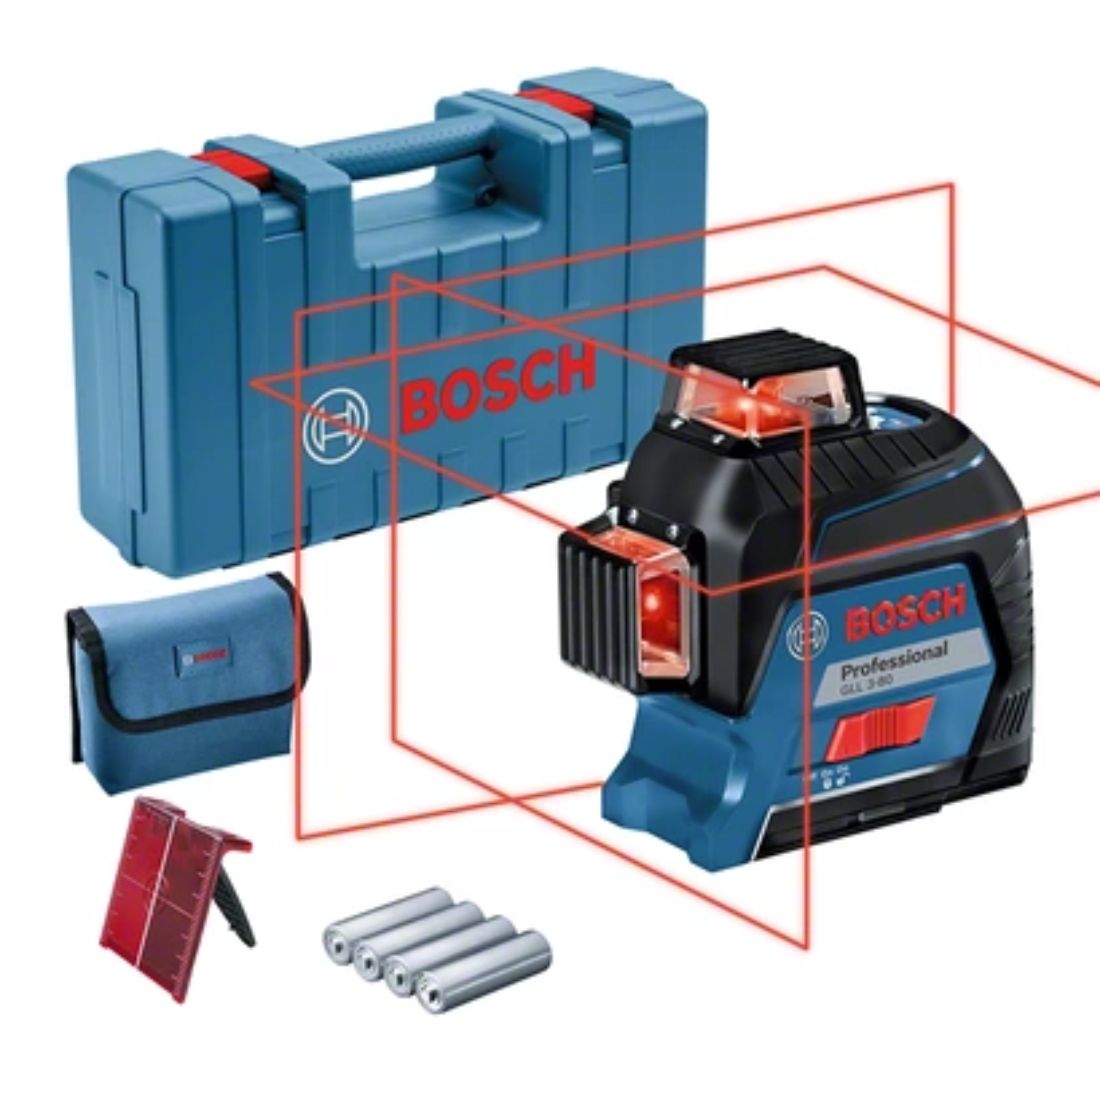 Bosch GLL 3-80 Professional Line Laser with Self Levelling 30m Range 120m Range with receiver, IP 54